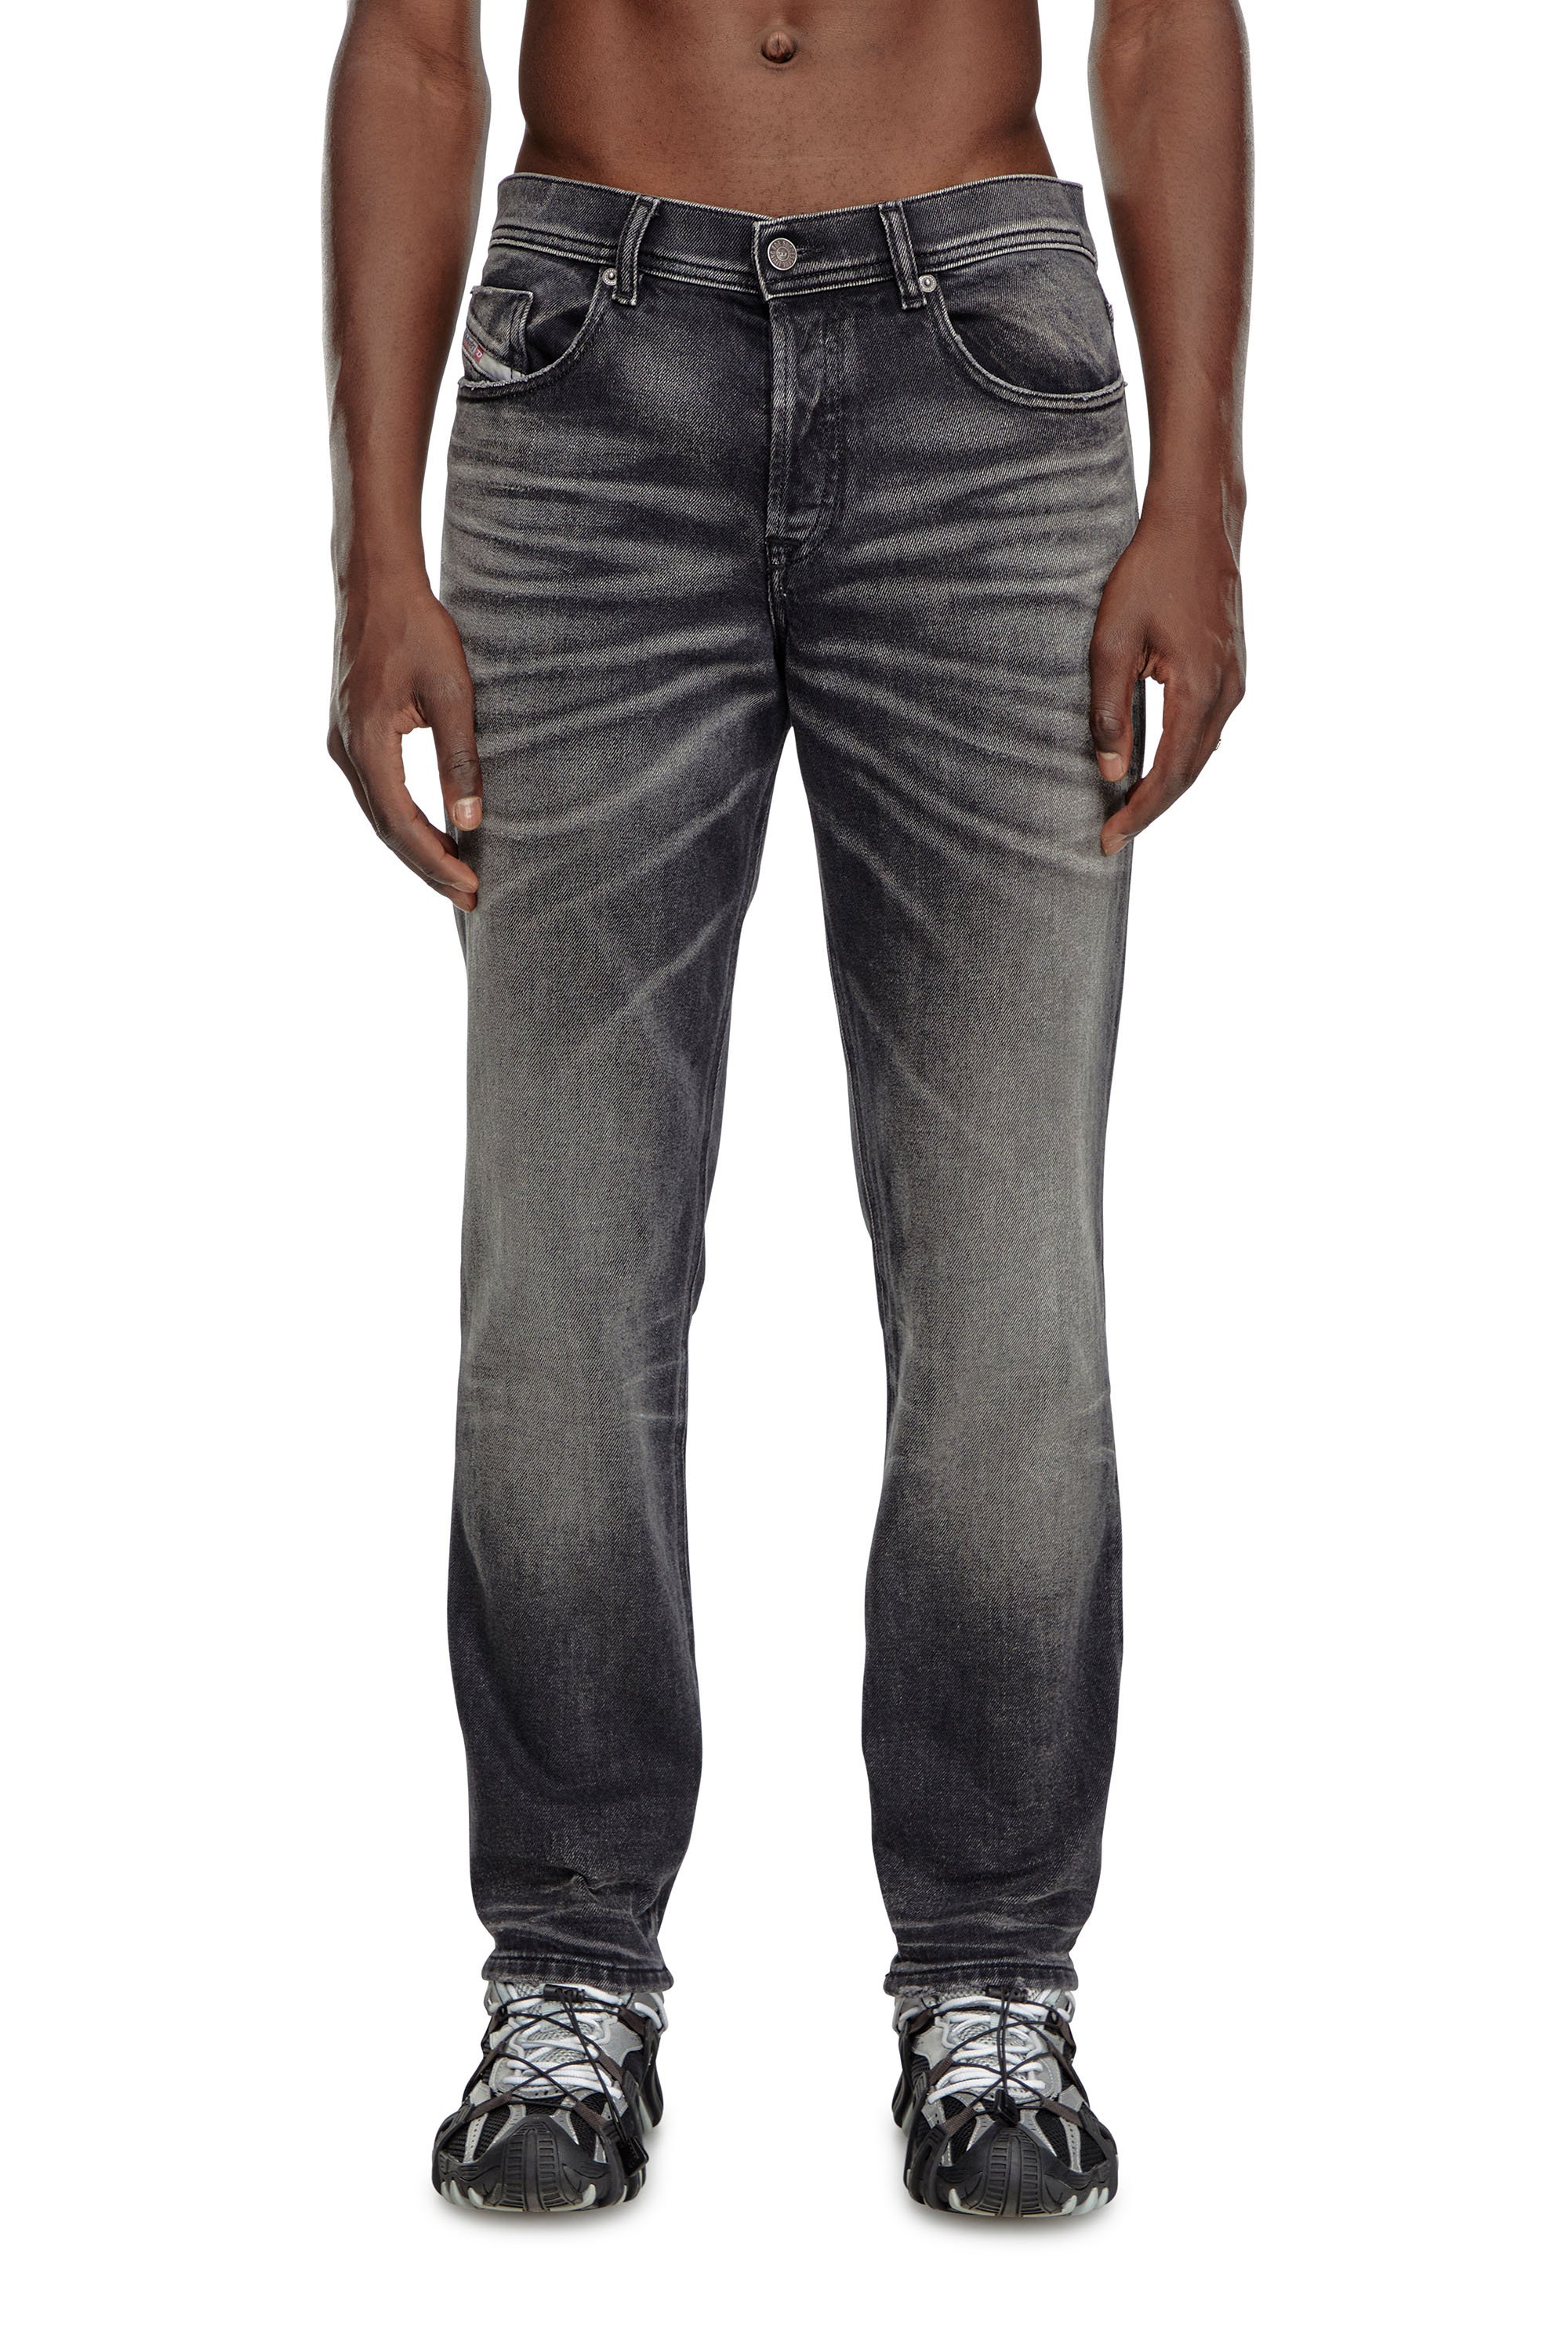 Diesel - Tapered Jeans 2023 D-Finitive 09J65, Hombre Tapered Jeans - 2023 D-Finitive in Negro - Image 1